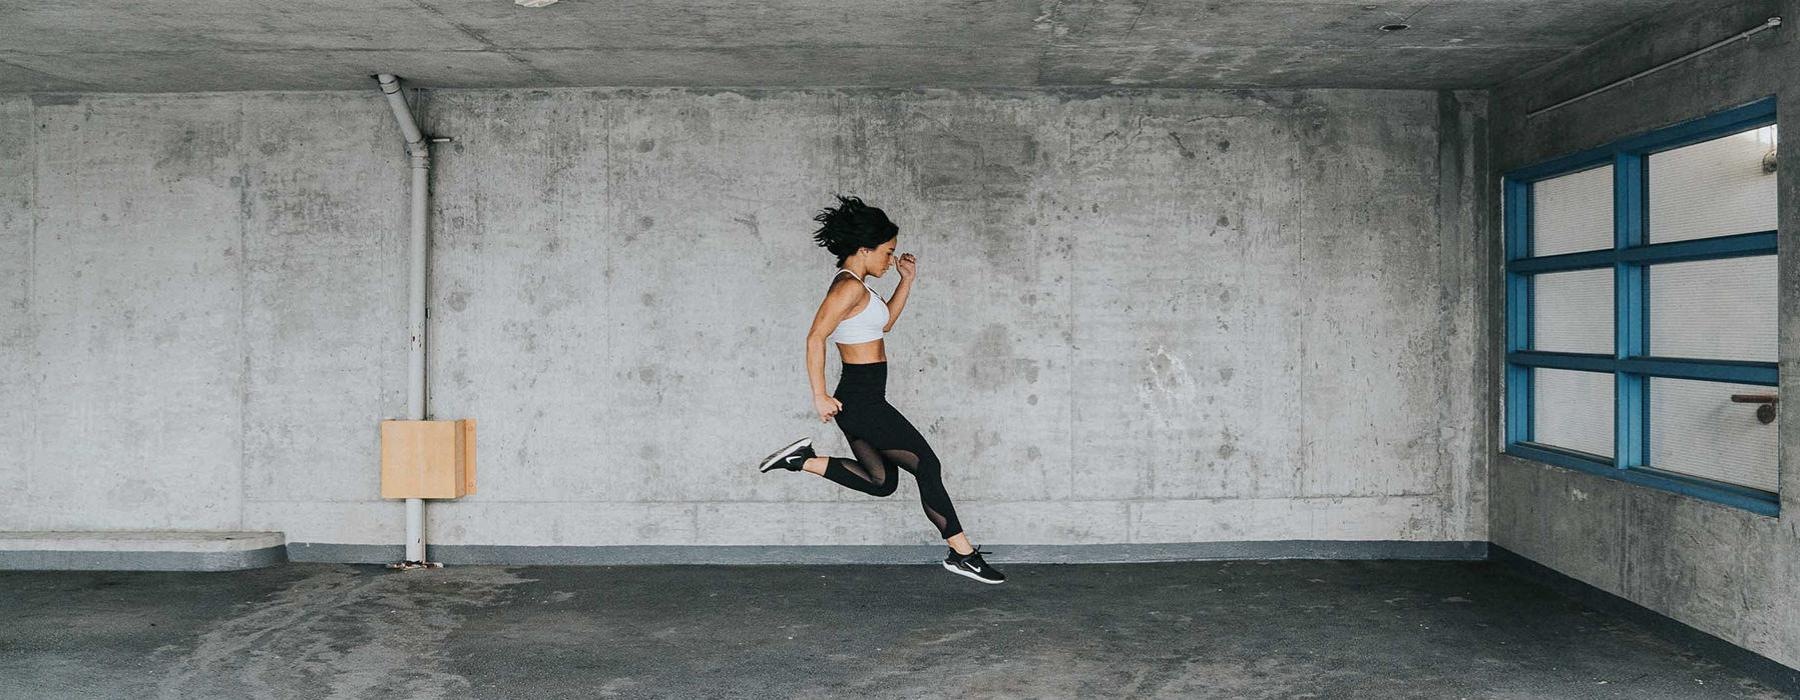 a woman jumping in a concrete room